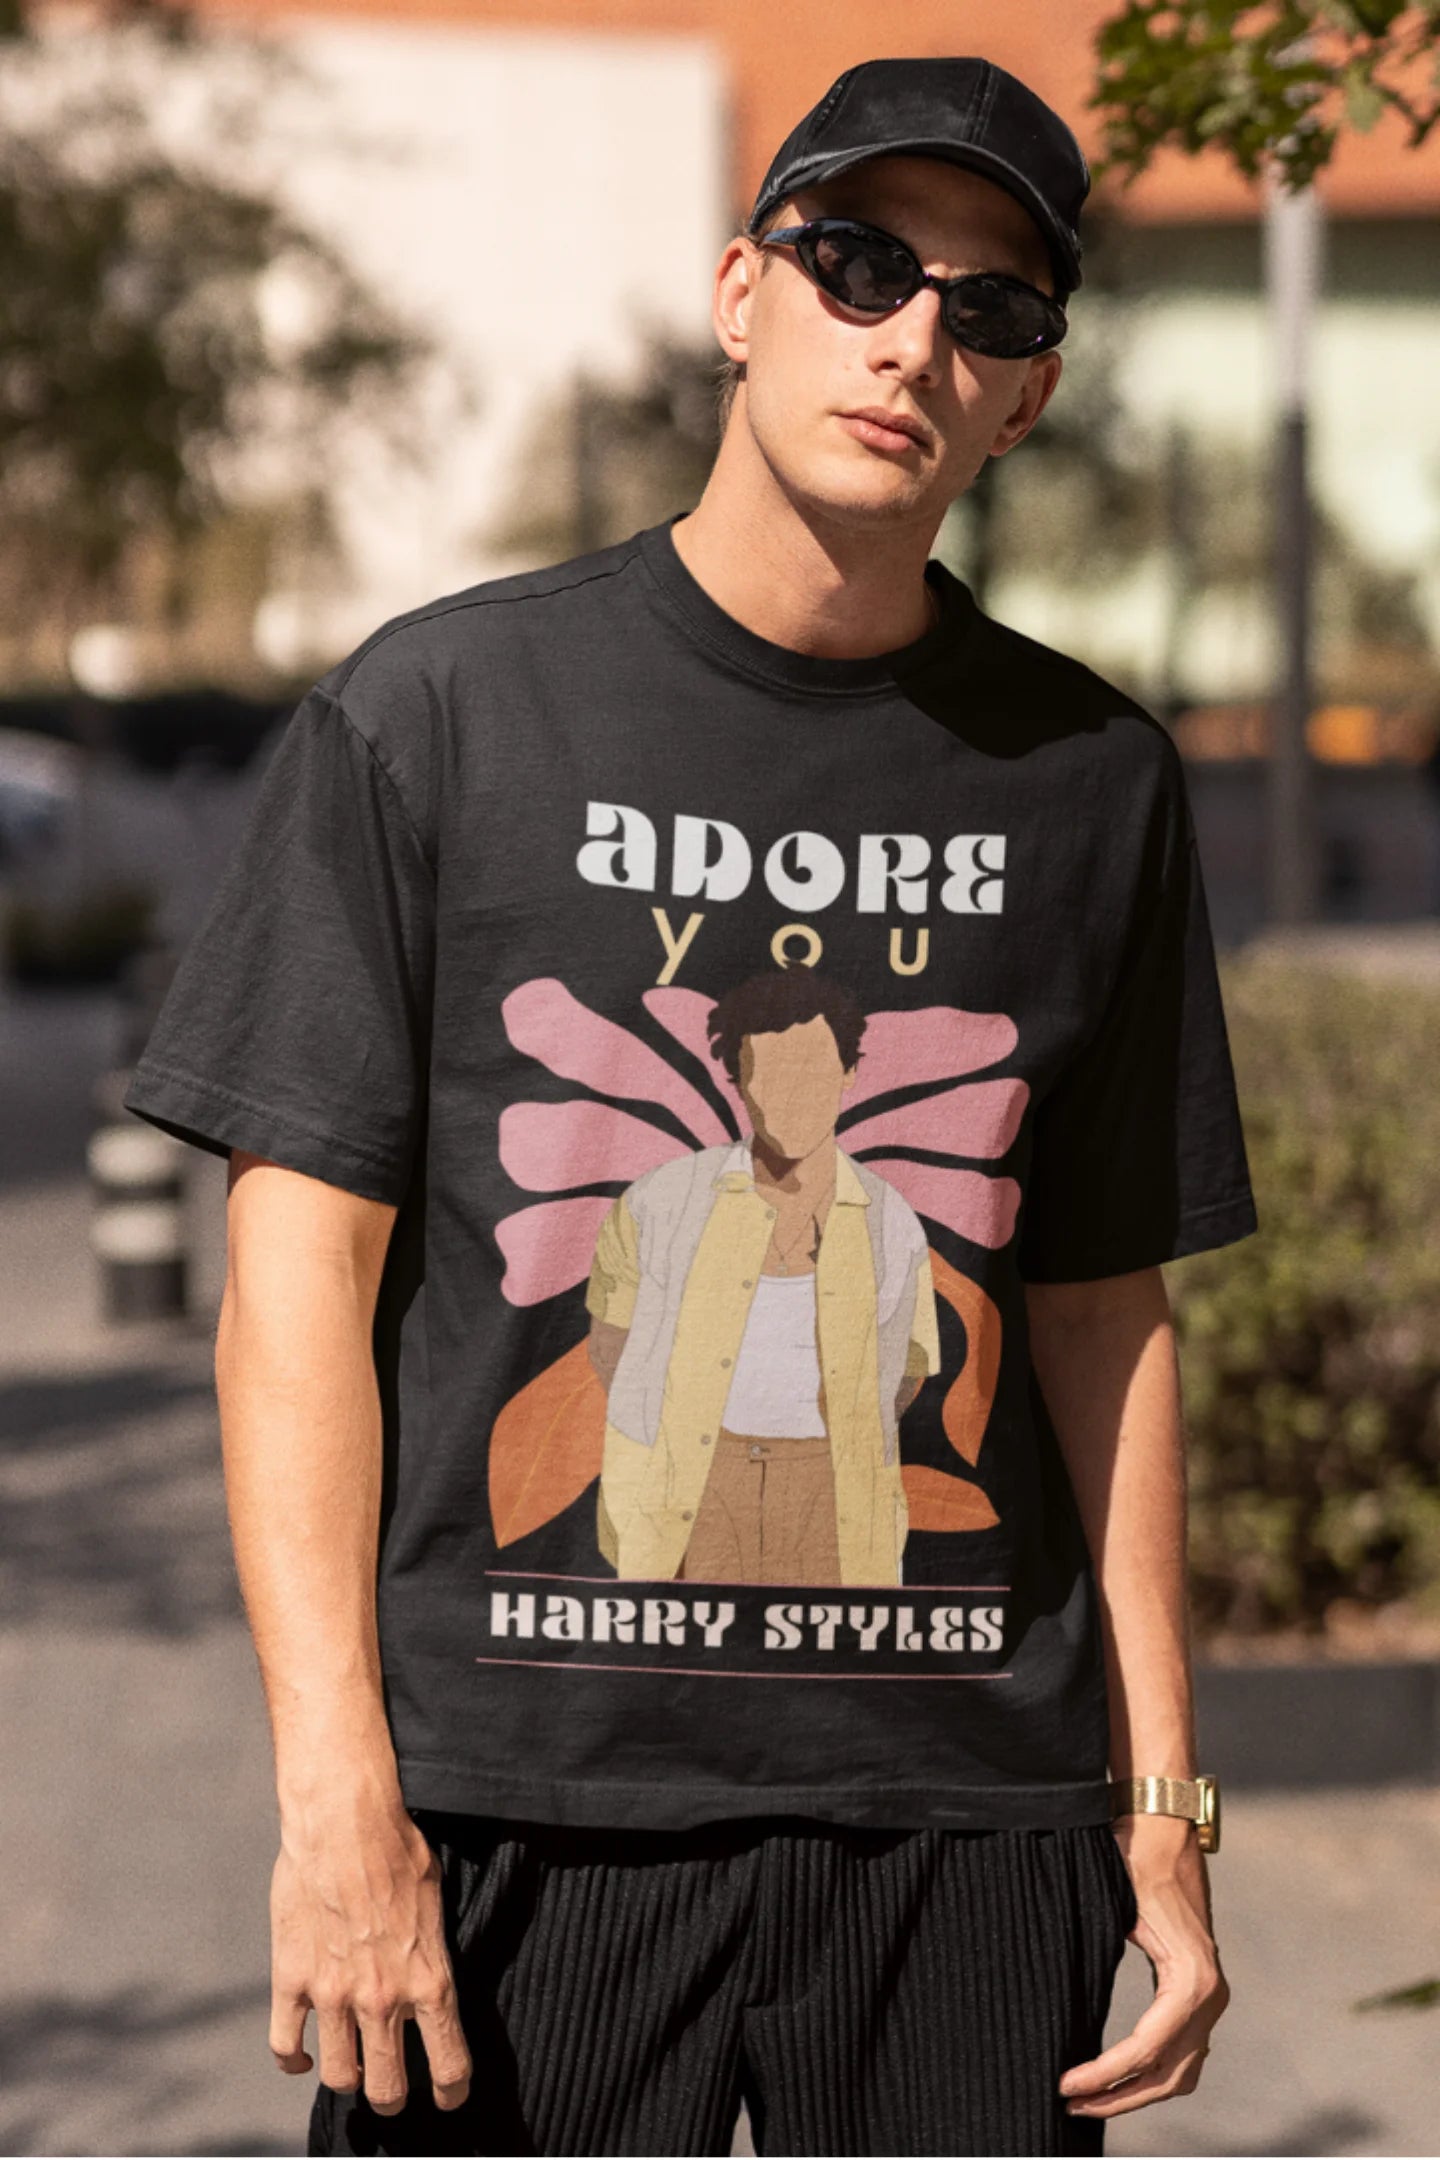 Third image of man wearing black oversized t-shirt featuring 'Adore You' inspired design - ideal for fans of Harry Styles and One Direction